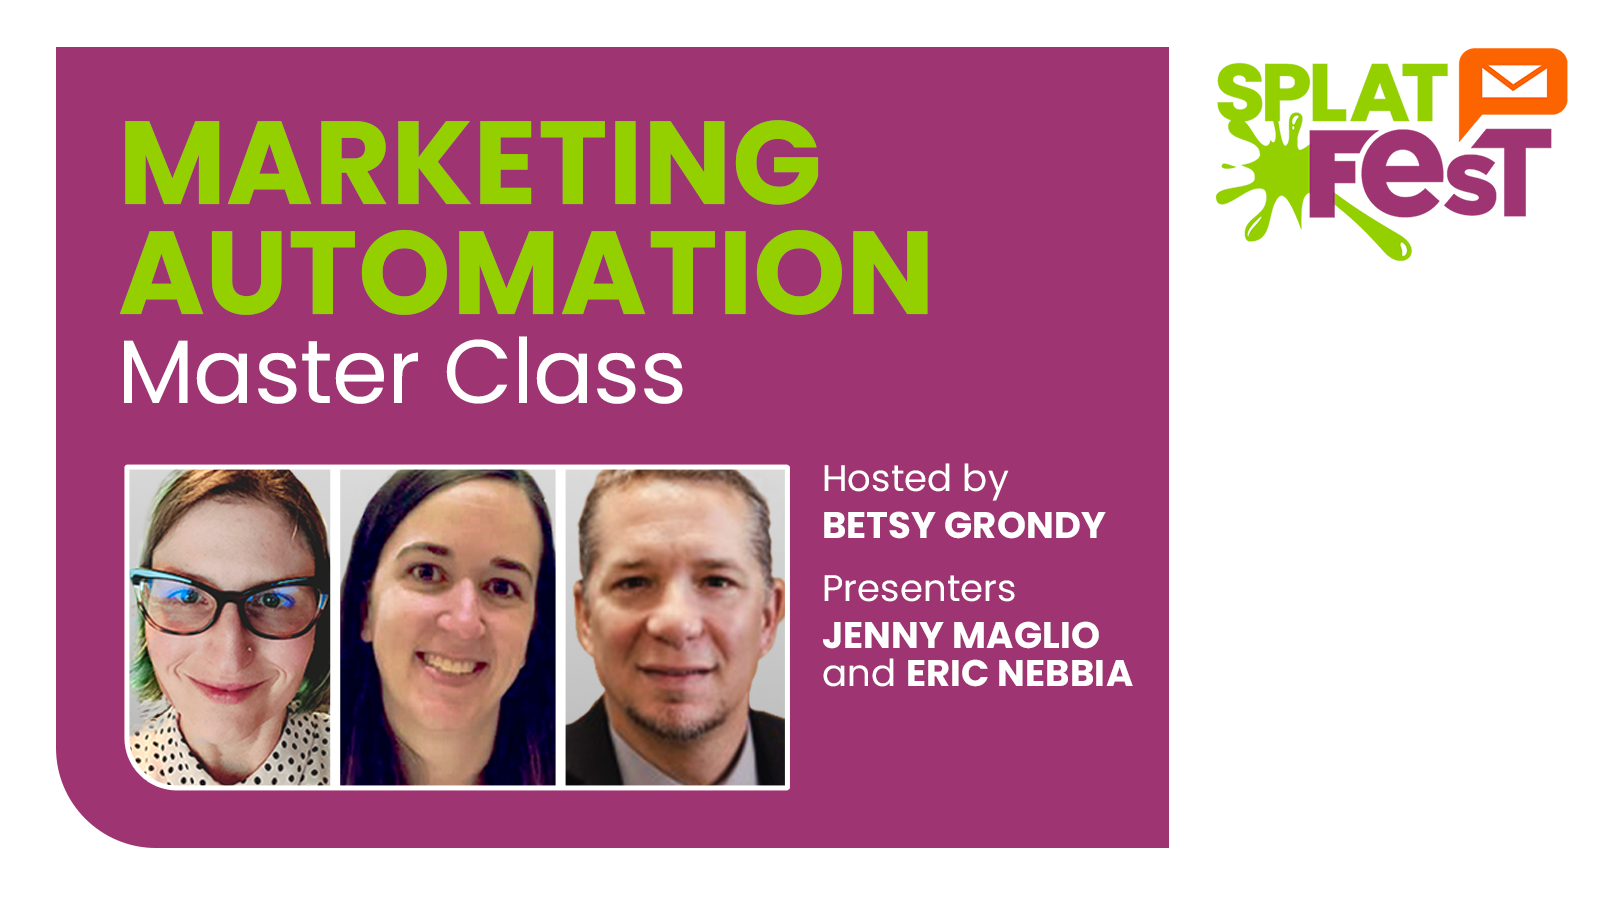 Marketing automation master class hosted by betsy grondy